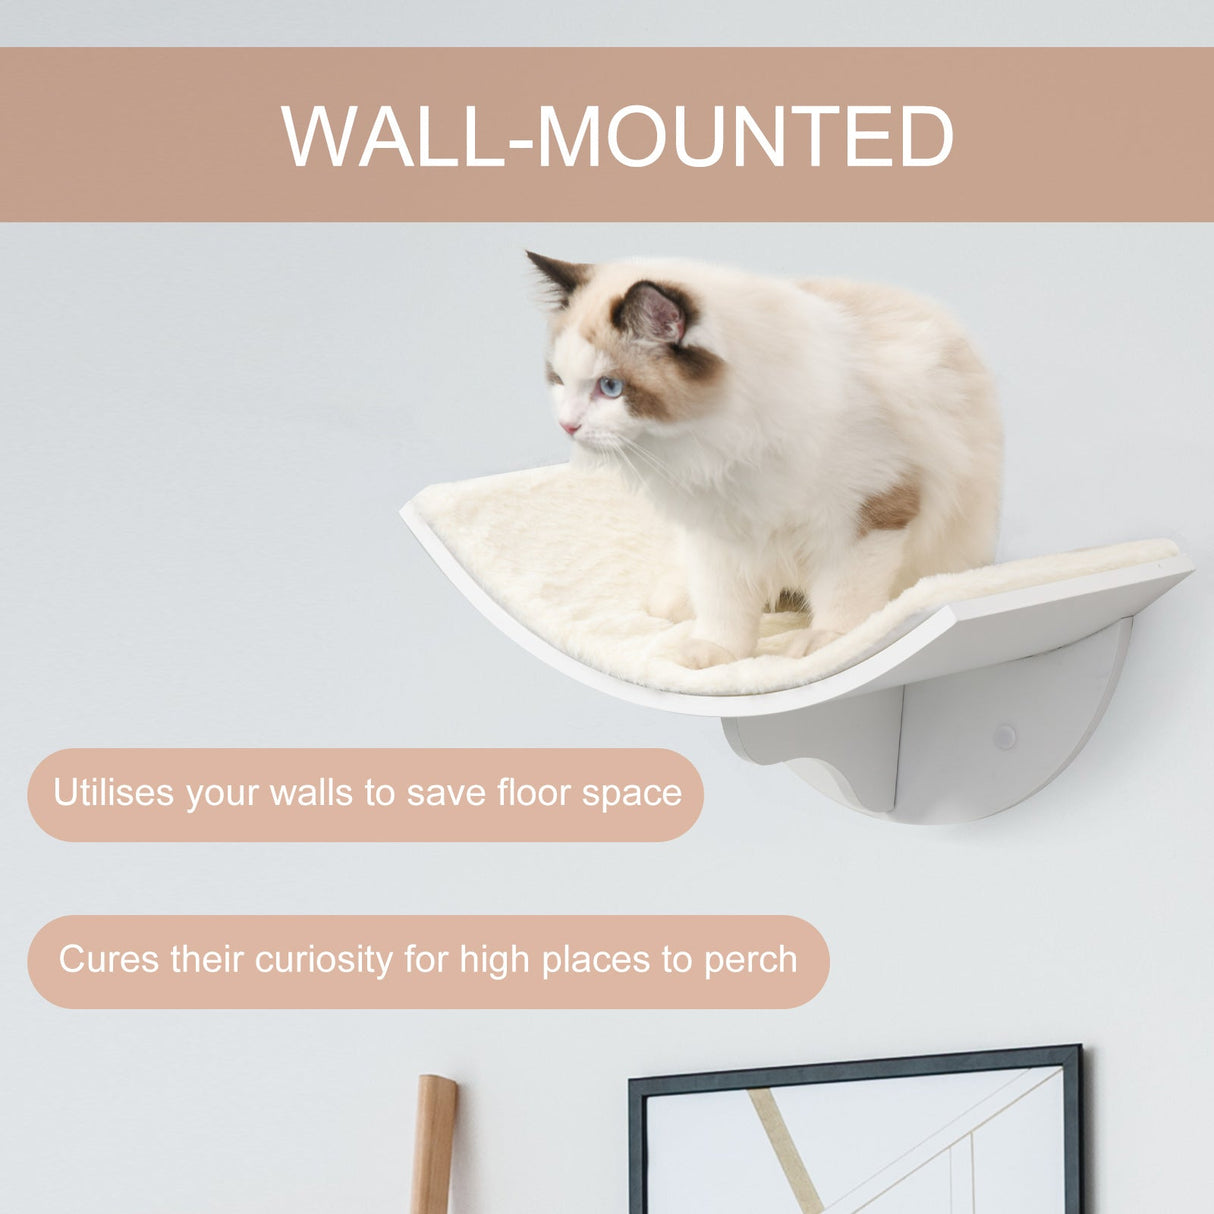 Wood Cat Shelves Wall-Mounted Shelter Curved Kitten Bed Cat Perch Climber Cat Furniture 41 x 28 x 21cm, PawHut, Brown